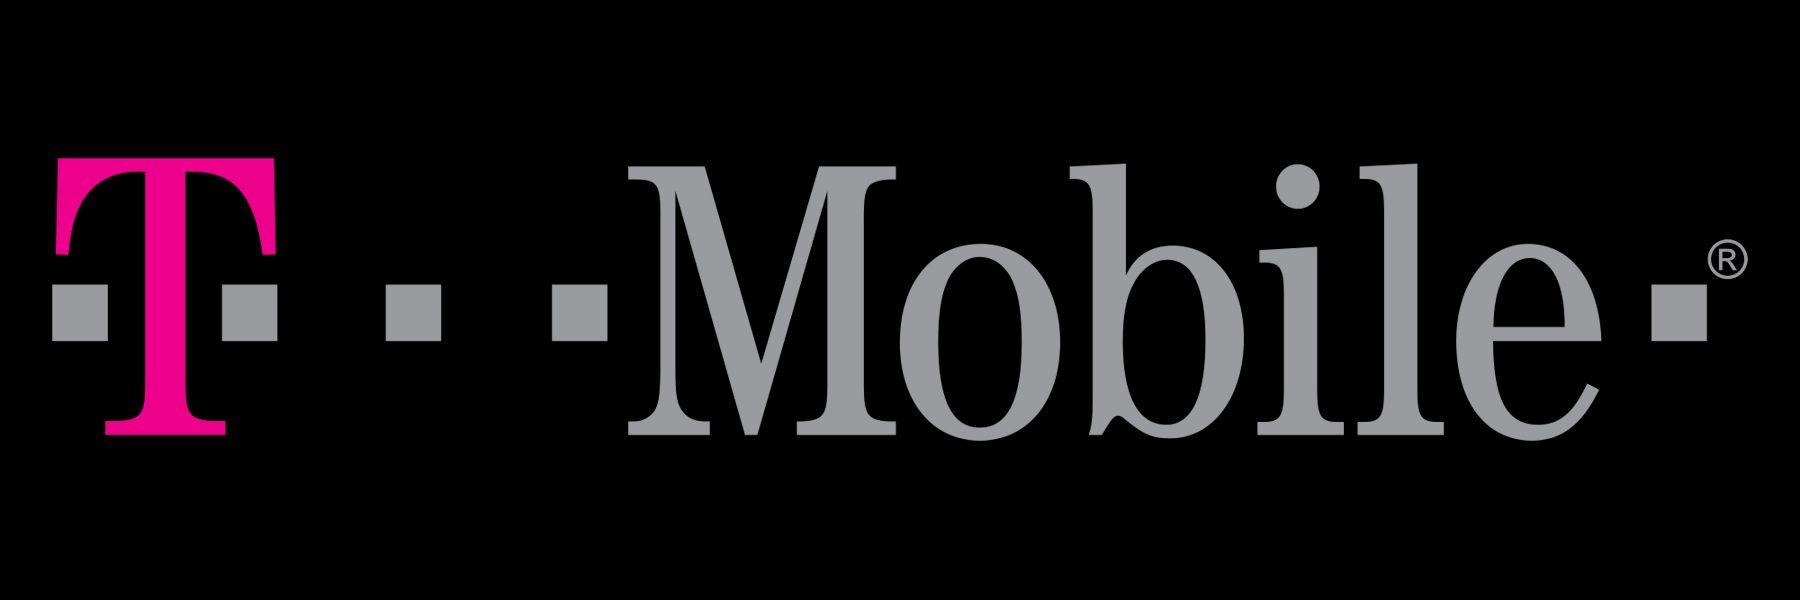 New T-Mobile Logo - T Mobile Logo, T Mobile Symbol, Meaning, History And Evolution